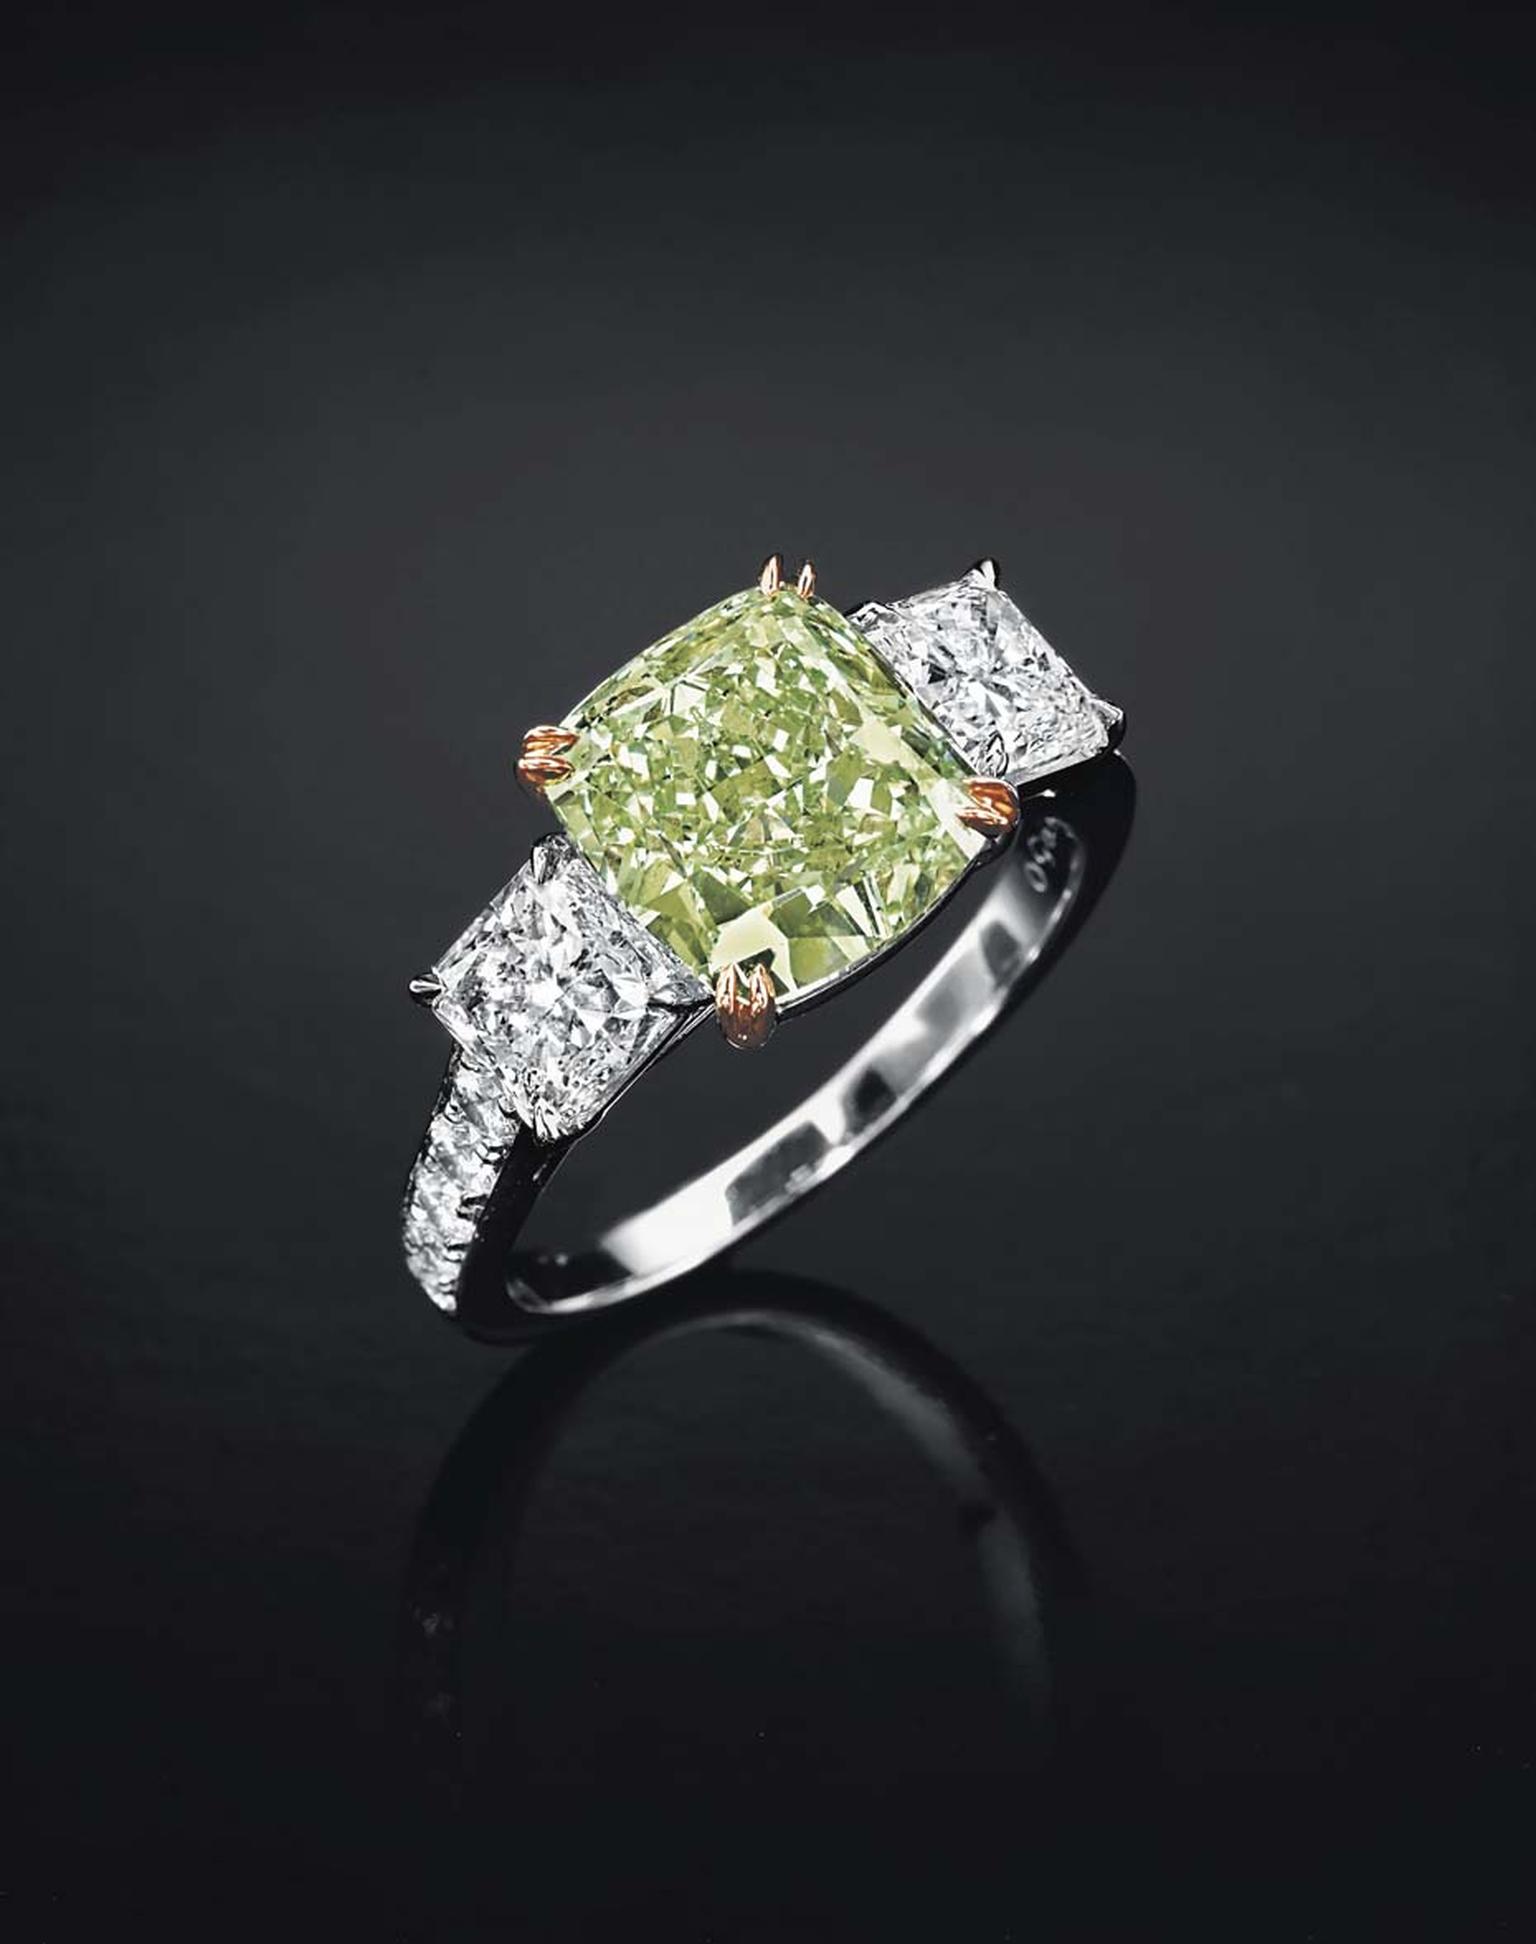 Lot 197, a rare coloured diamond and diamond ring in platinum and rose gold, set with a modified square-cut fancy intense green diamond weighing approximately 3.60ct (estimate: US$800,000-1.2 million)